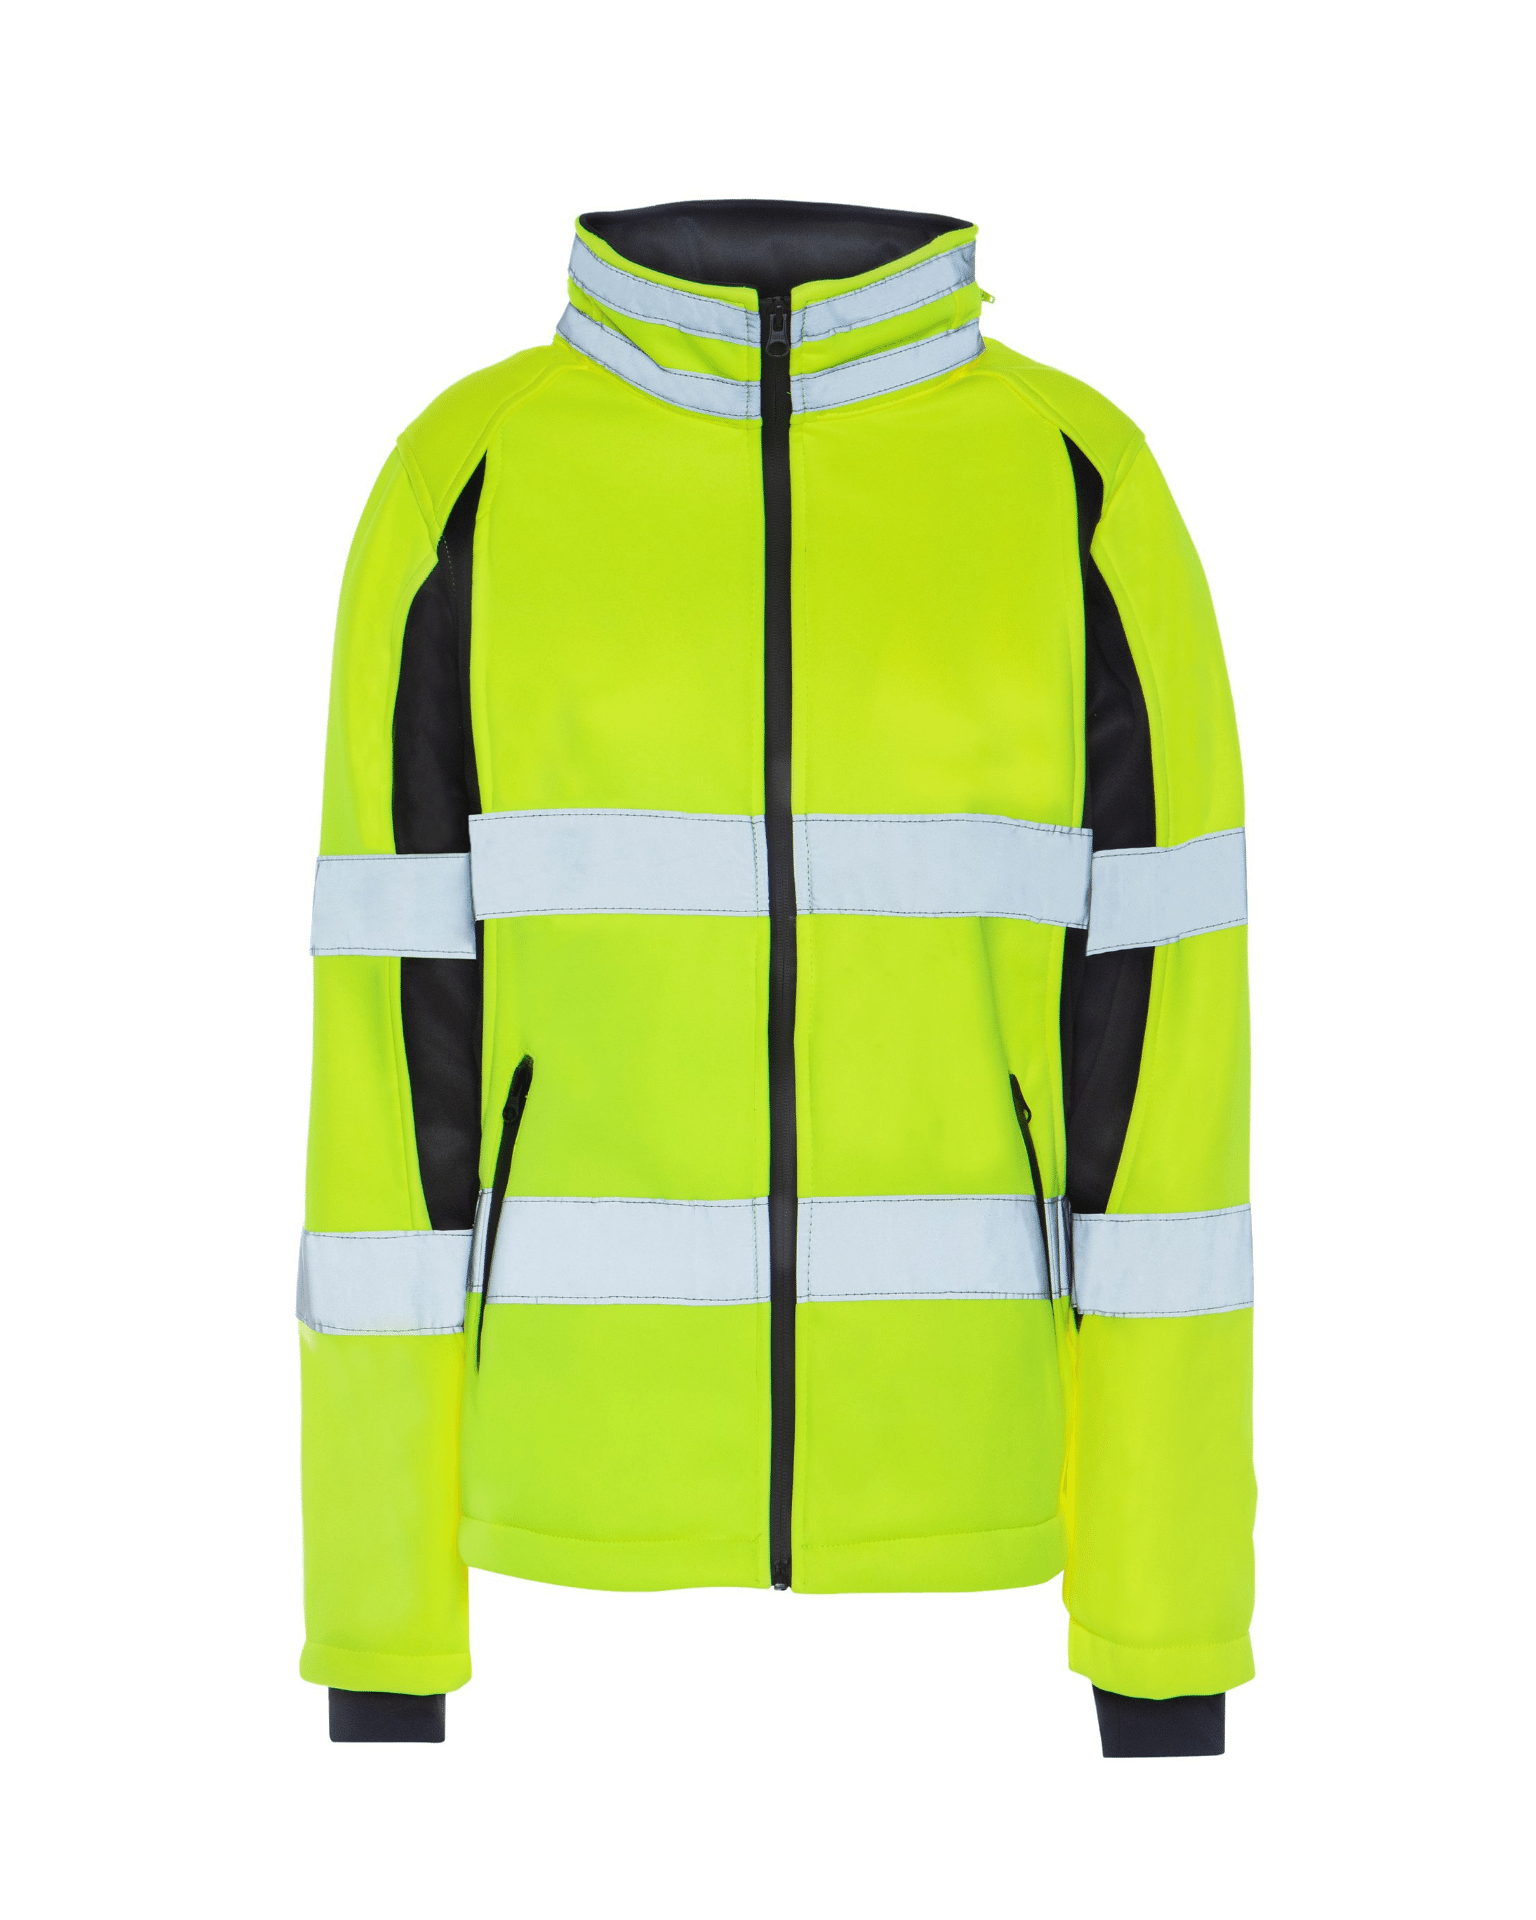 ANSI Class 2 High Visibility Women's soft shell full zip hidden hood polyester jacket by Utility Pro